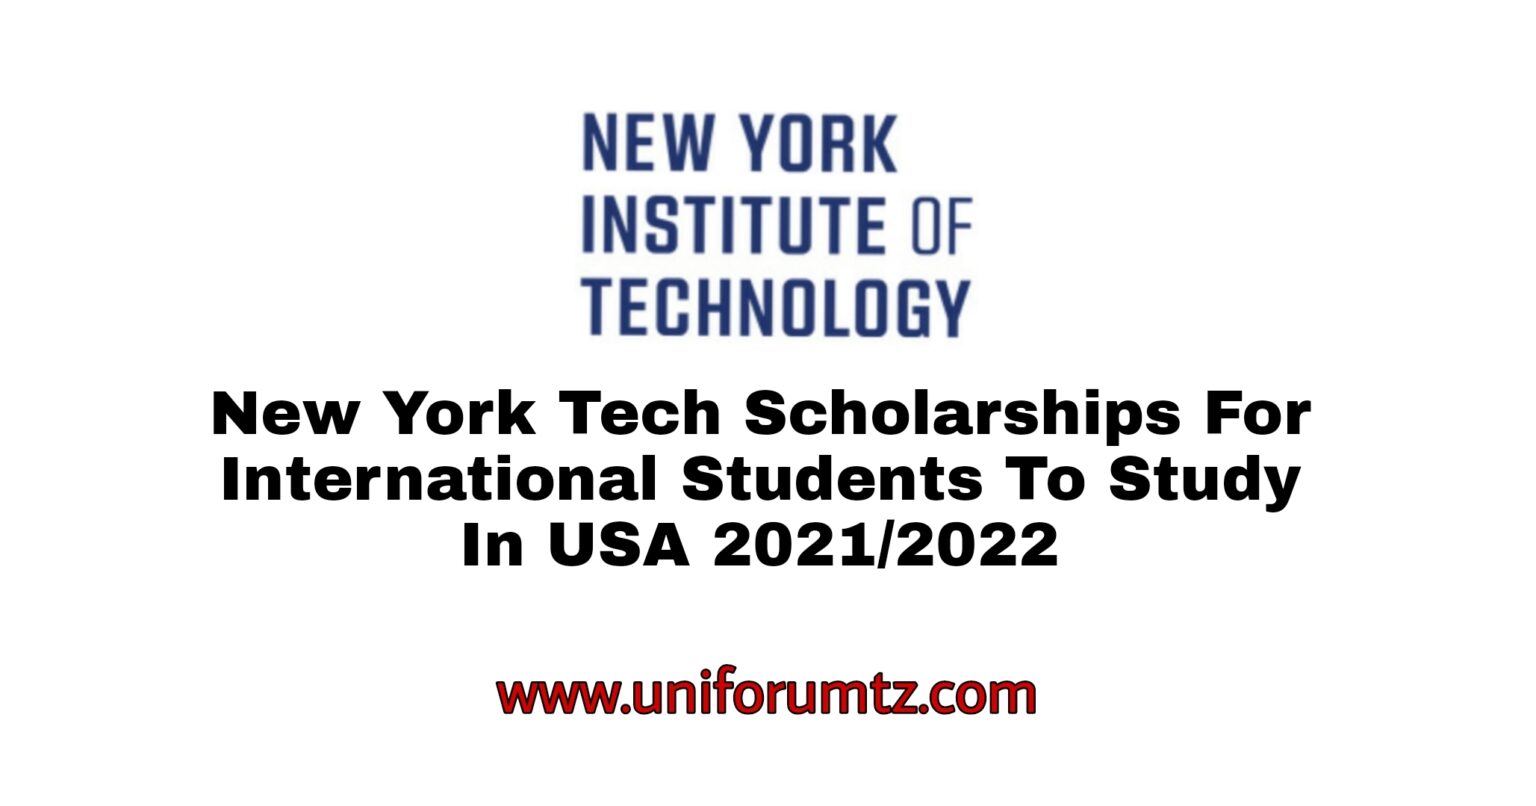 New York Tech Scholarships for International Students in the USA